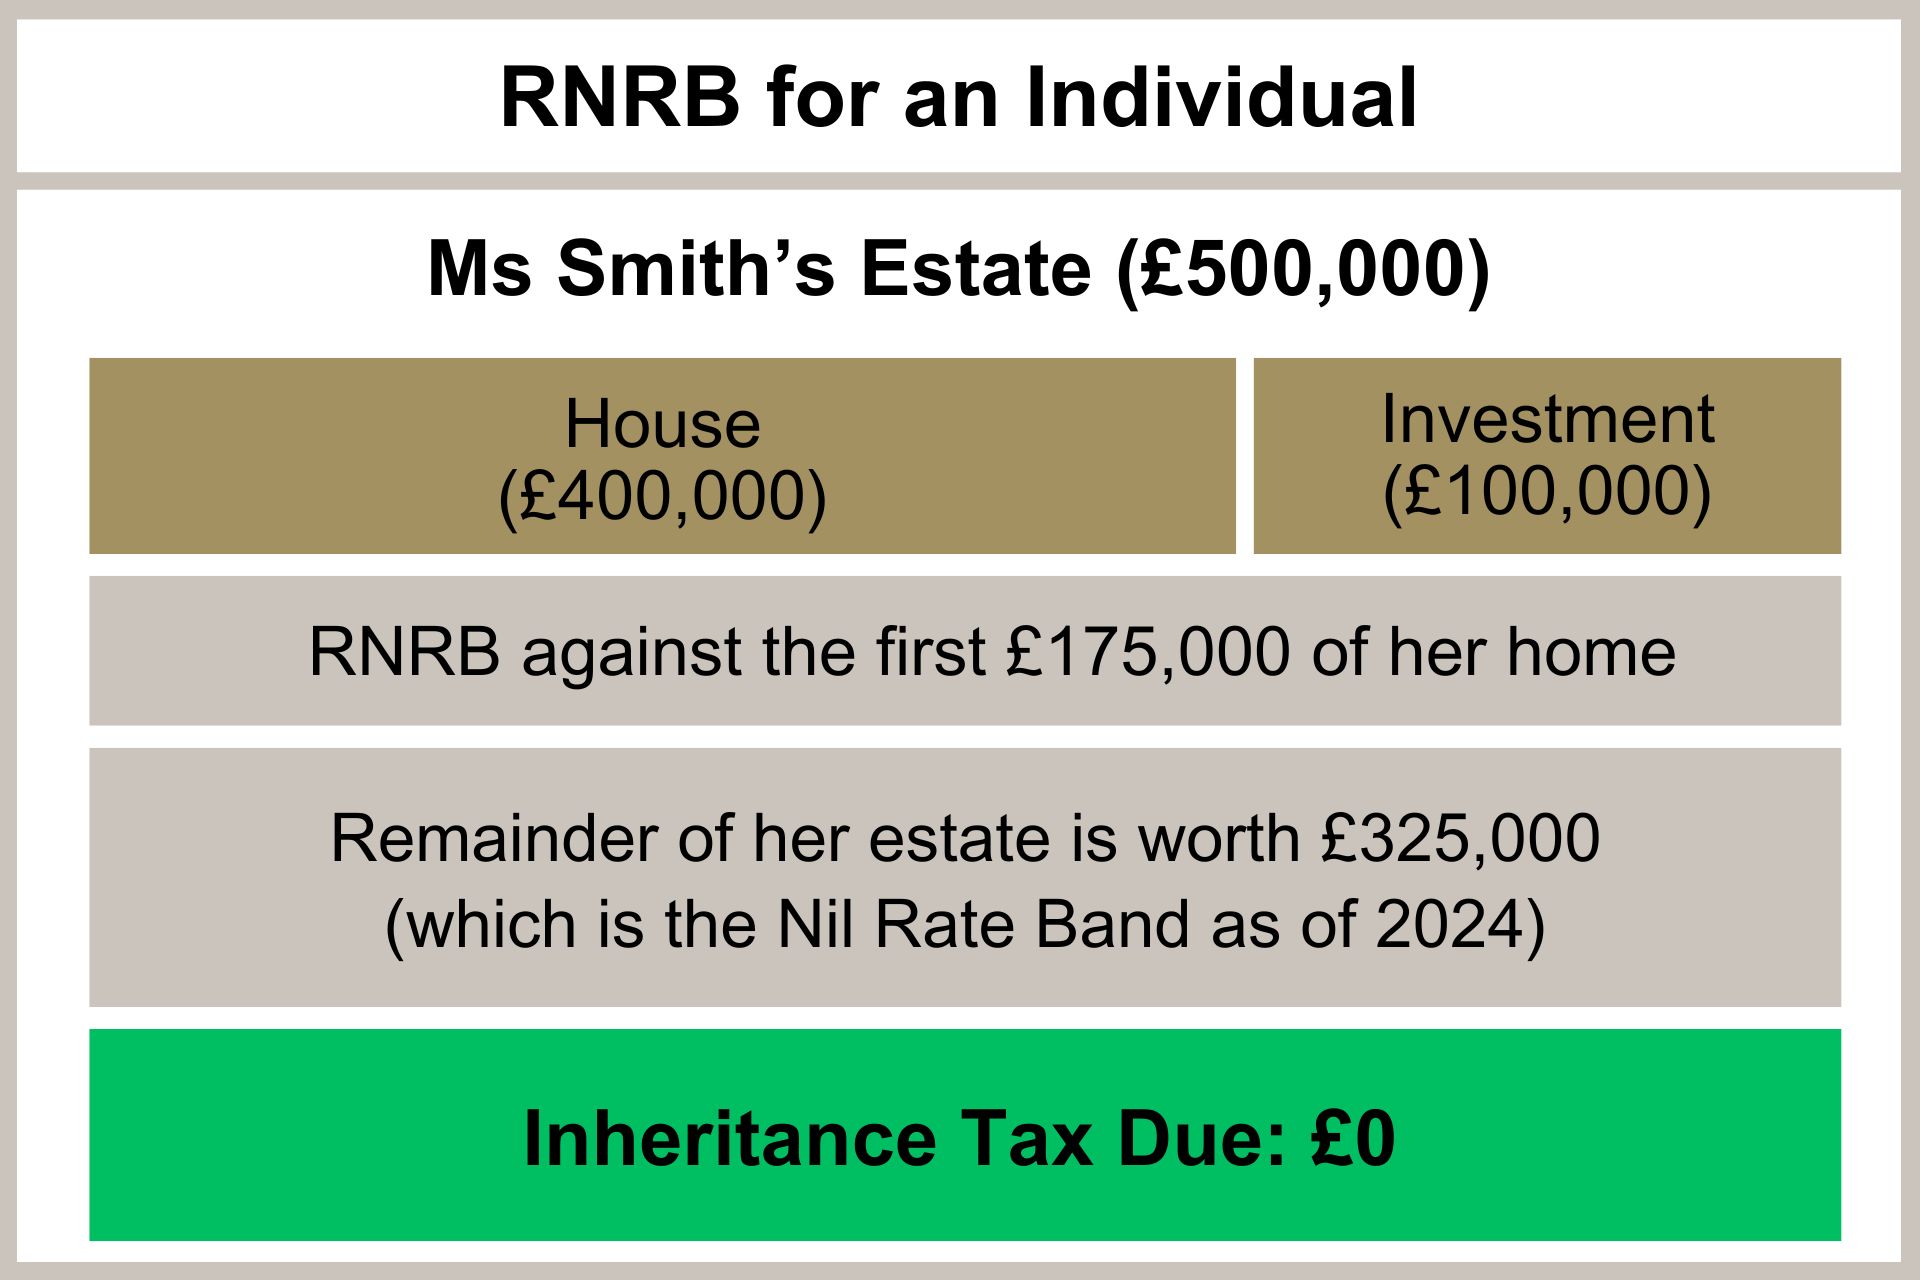 RNRB for an individual in the UK